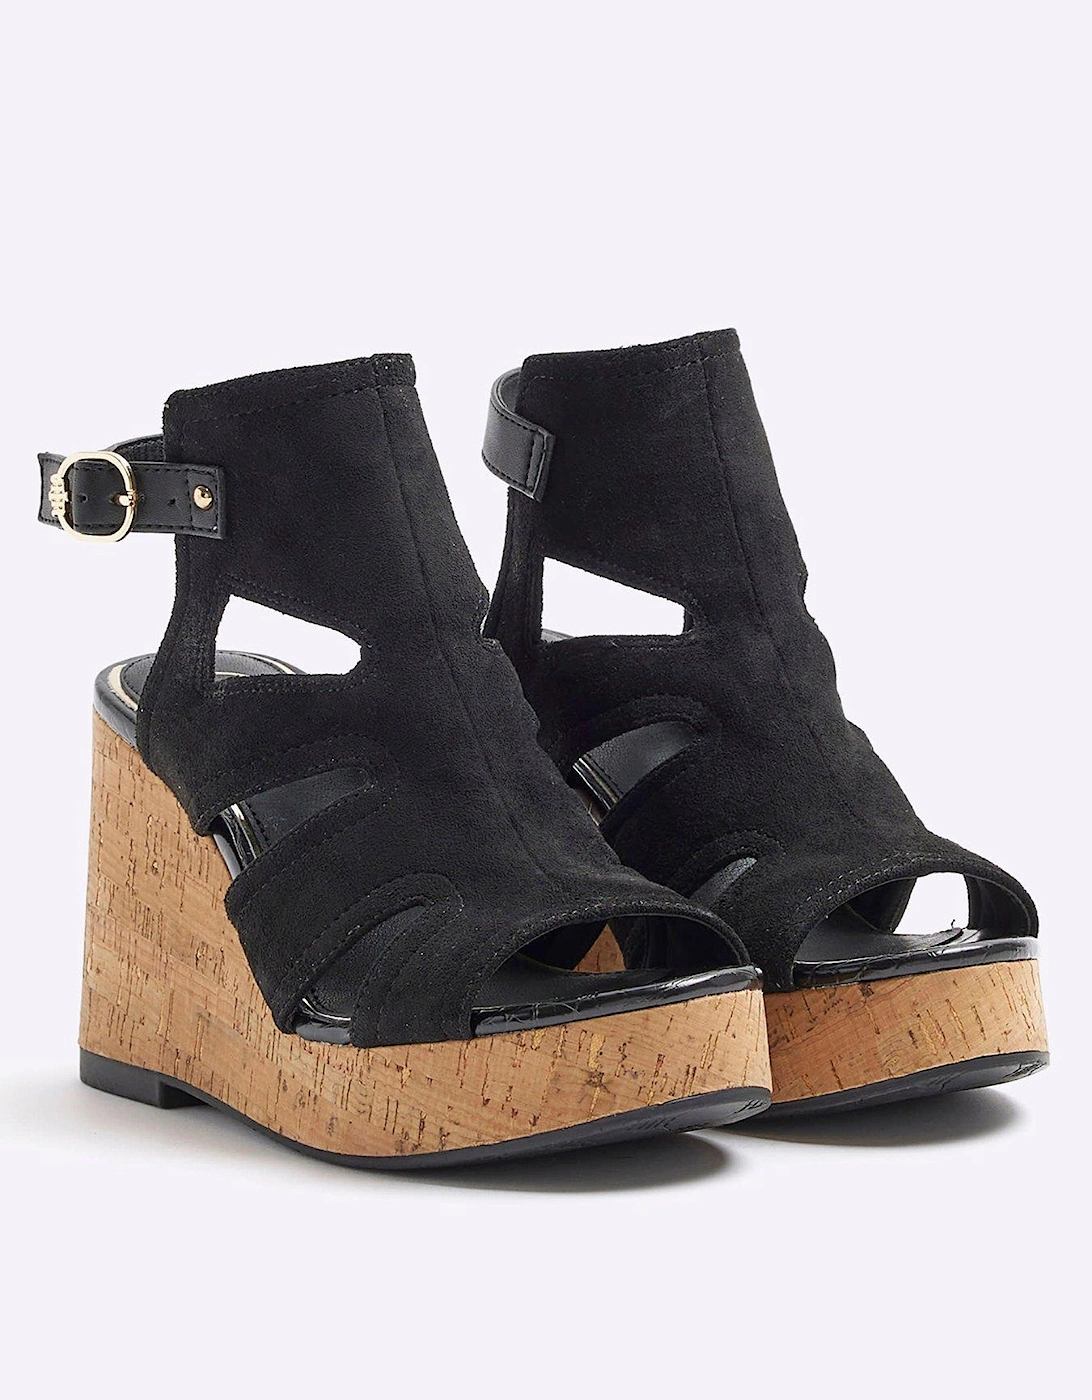 Cut Out Wedge Sandals - Black